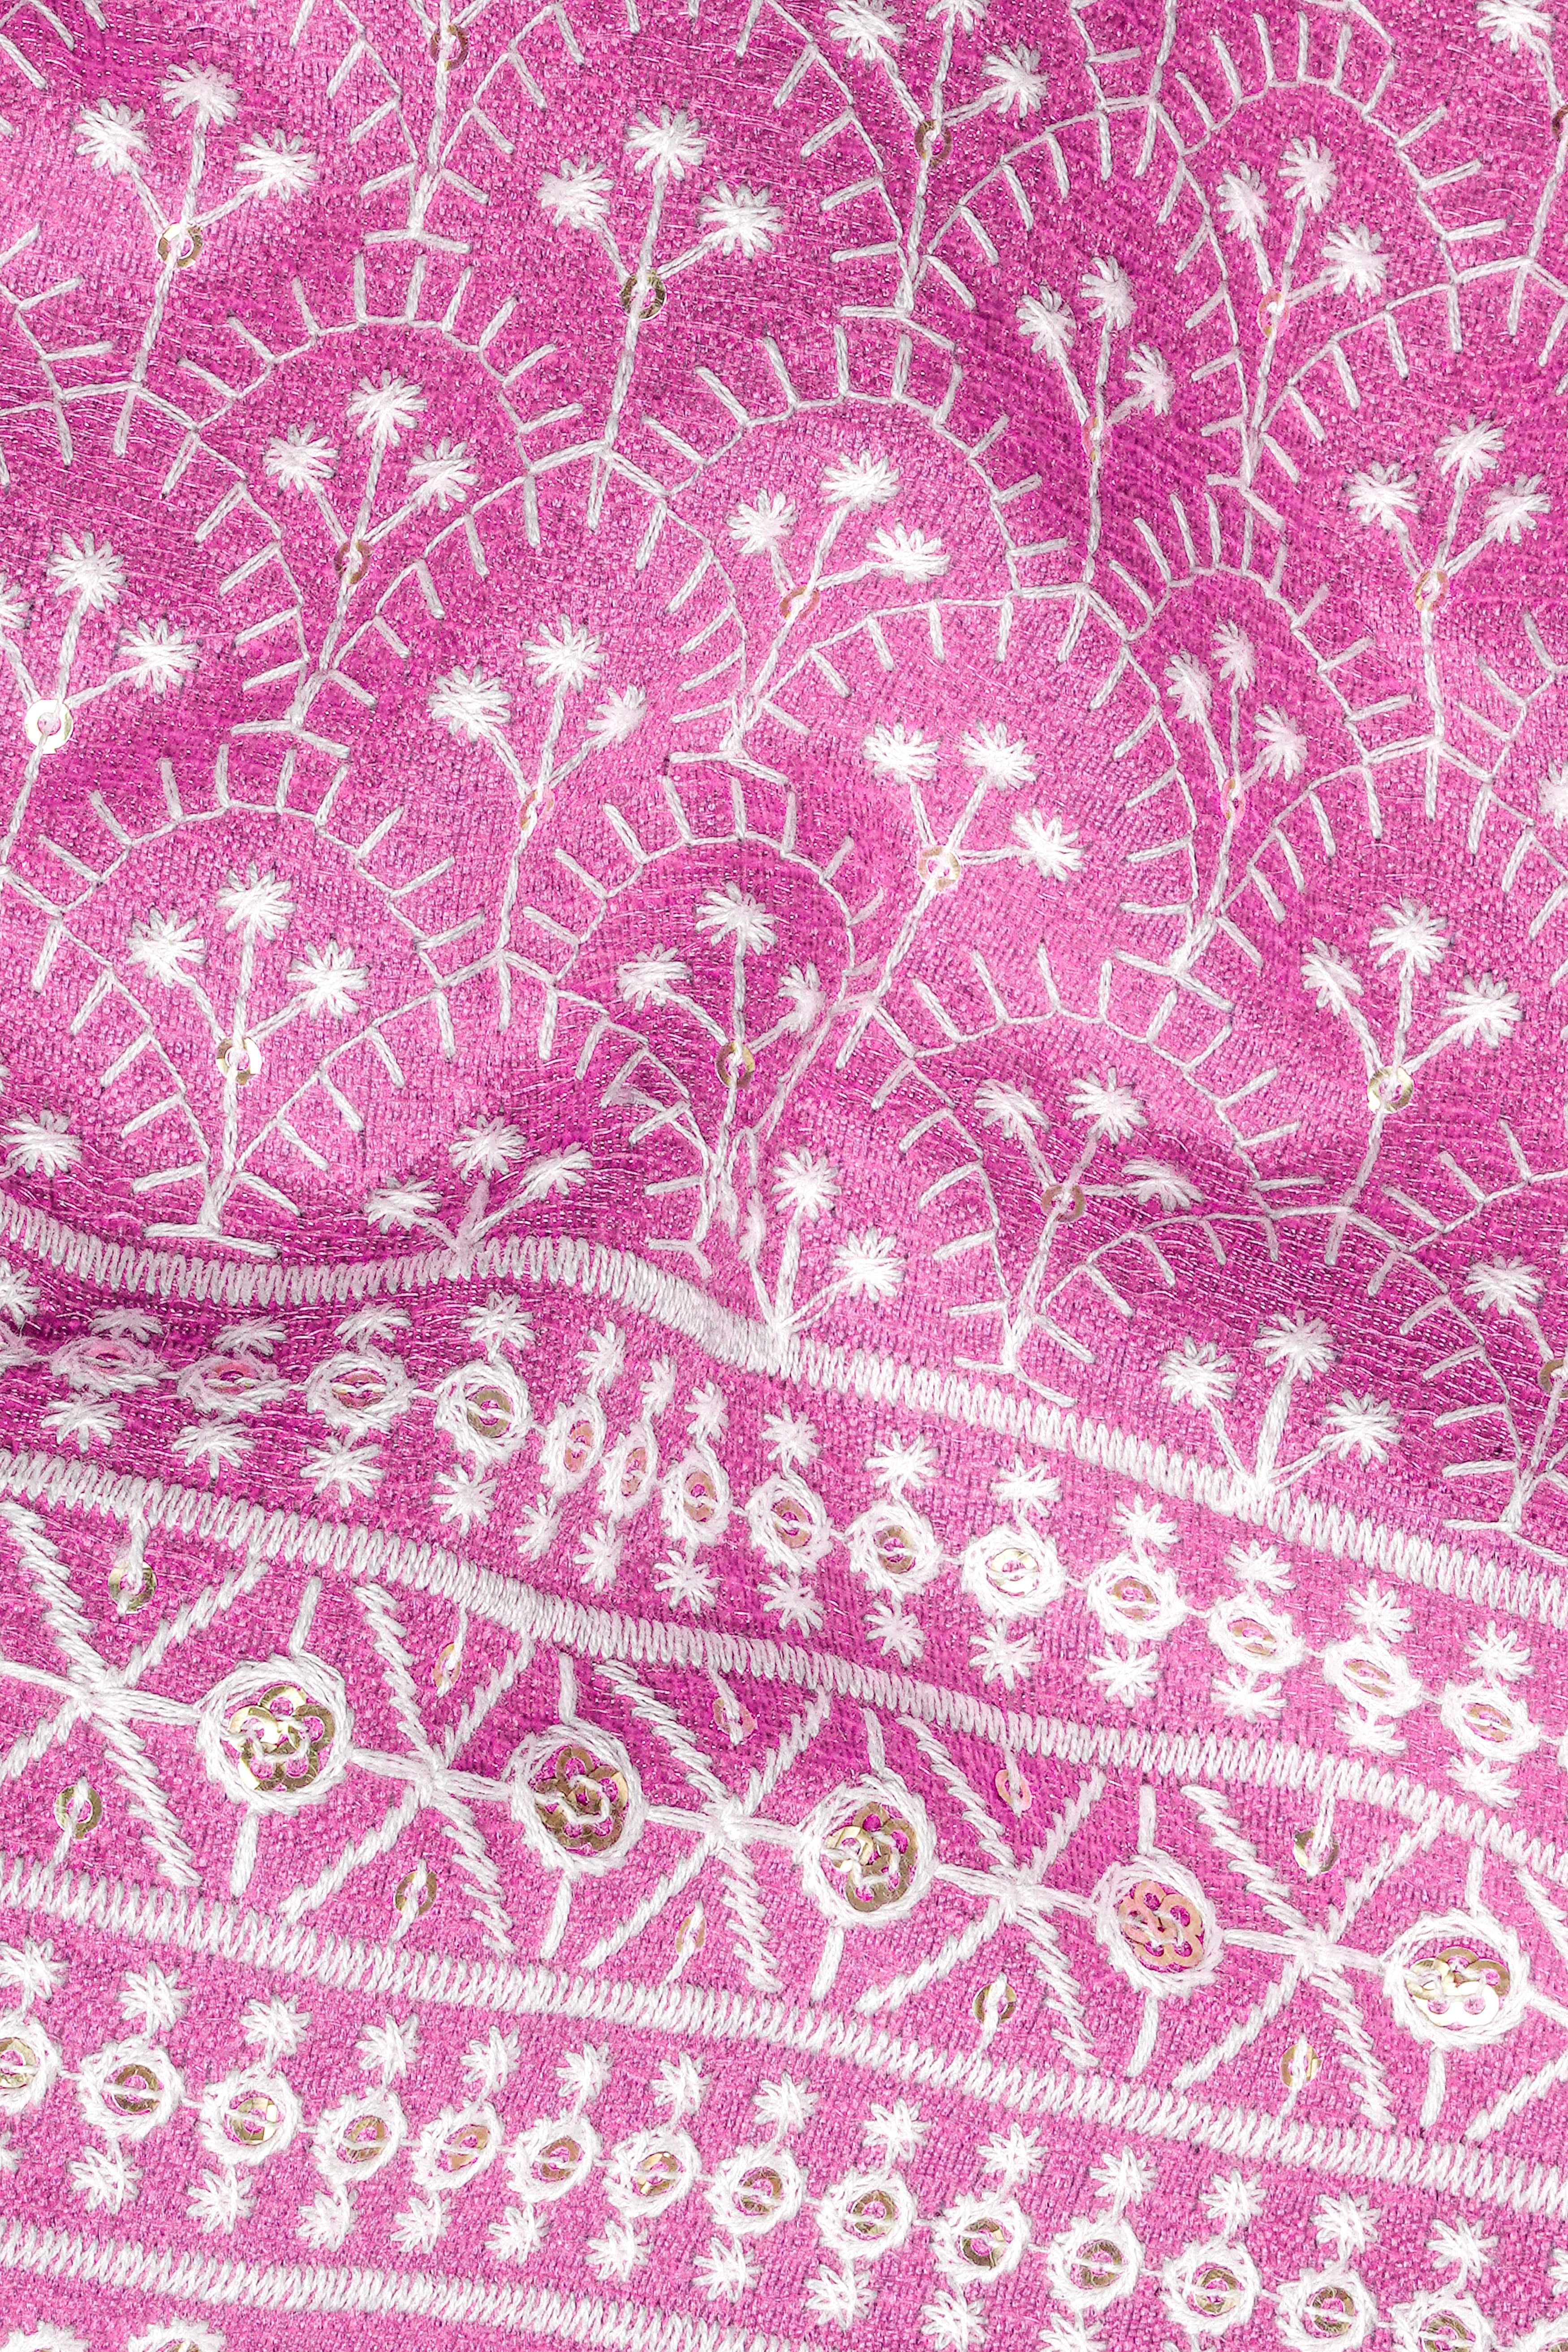 Bashful Pink and White Thread Embroidered Nehru Jacket WC3544-36,  WC3544-38,  WC3544-40,  WC3544-42,  WC3544-44,  WC3544-46,  WC3544-48,  WC3544-50,  WC3544-52,  WC3544-54,  WC3544-56,  WC3544-58,  WC3544-60